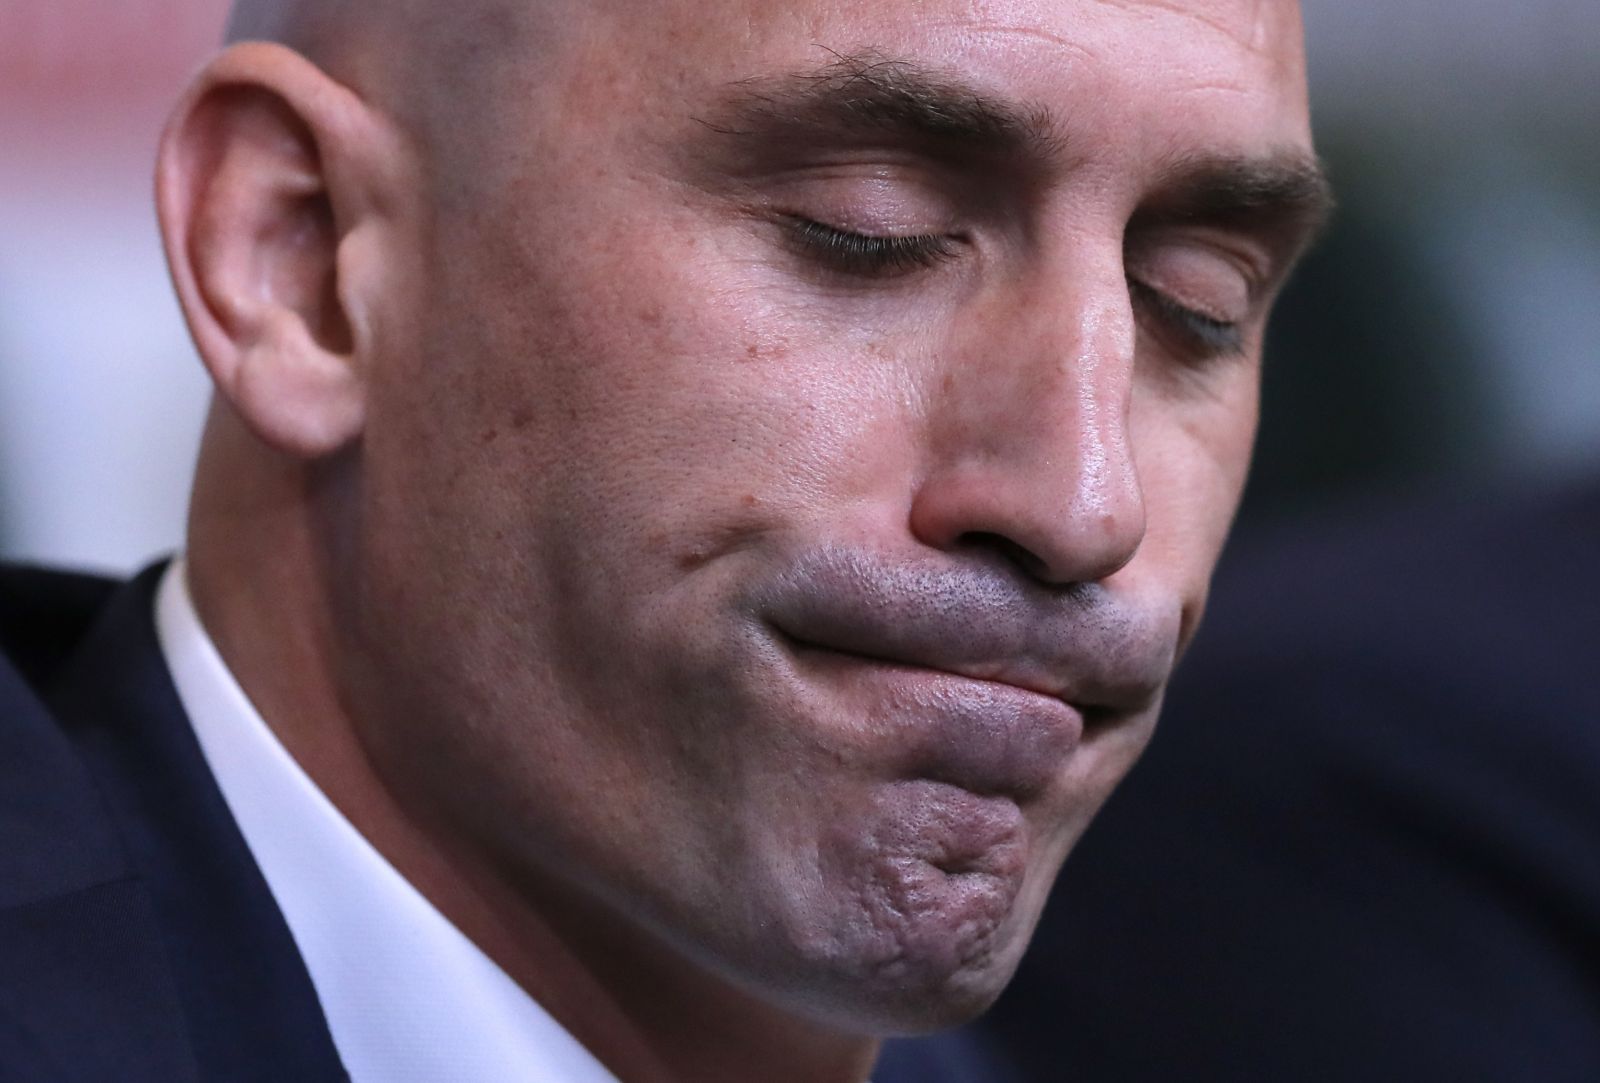 FILE - Spanish football president Luis Rubiales grimaces during a press conference at the 2018 soccer World Cup in Krasnodar, Russia, Wednesday, June 13, 2018. FIFA has banned ousted former Spanish soccer federation president Luis Rubiales from the sport for three years. He was judged for misconduct at the Women’s World Cup final where he forcibly kissed a player on the lips at the trophy ceremony. FIFA did not publish details of the verdict reached by its disciplinary committee judges. (AP Photo/Manu Fernandez, File)